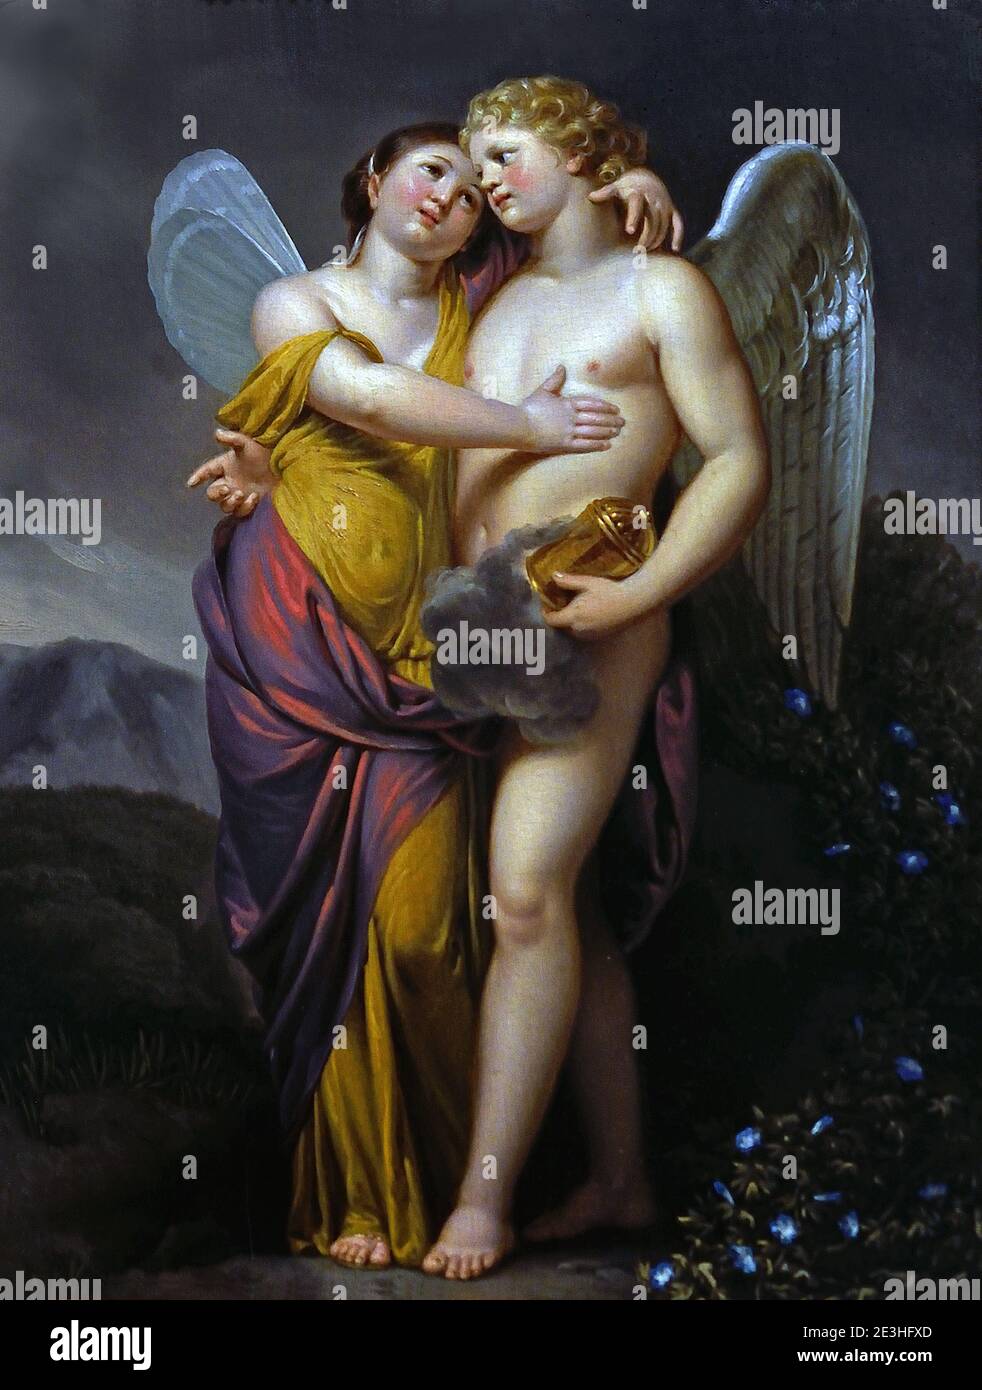 Following an Absence and Great Perils, Psyche Again Sees and Embraces Her Dear Cupid 1796 Pierre-Joseph-Célestin François 1759-1851 Belgian, Belgium, Flemish, Stock Photo